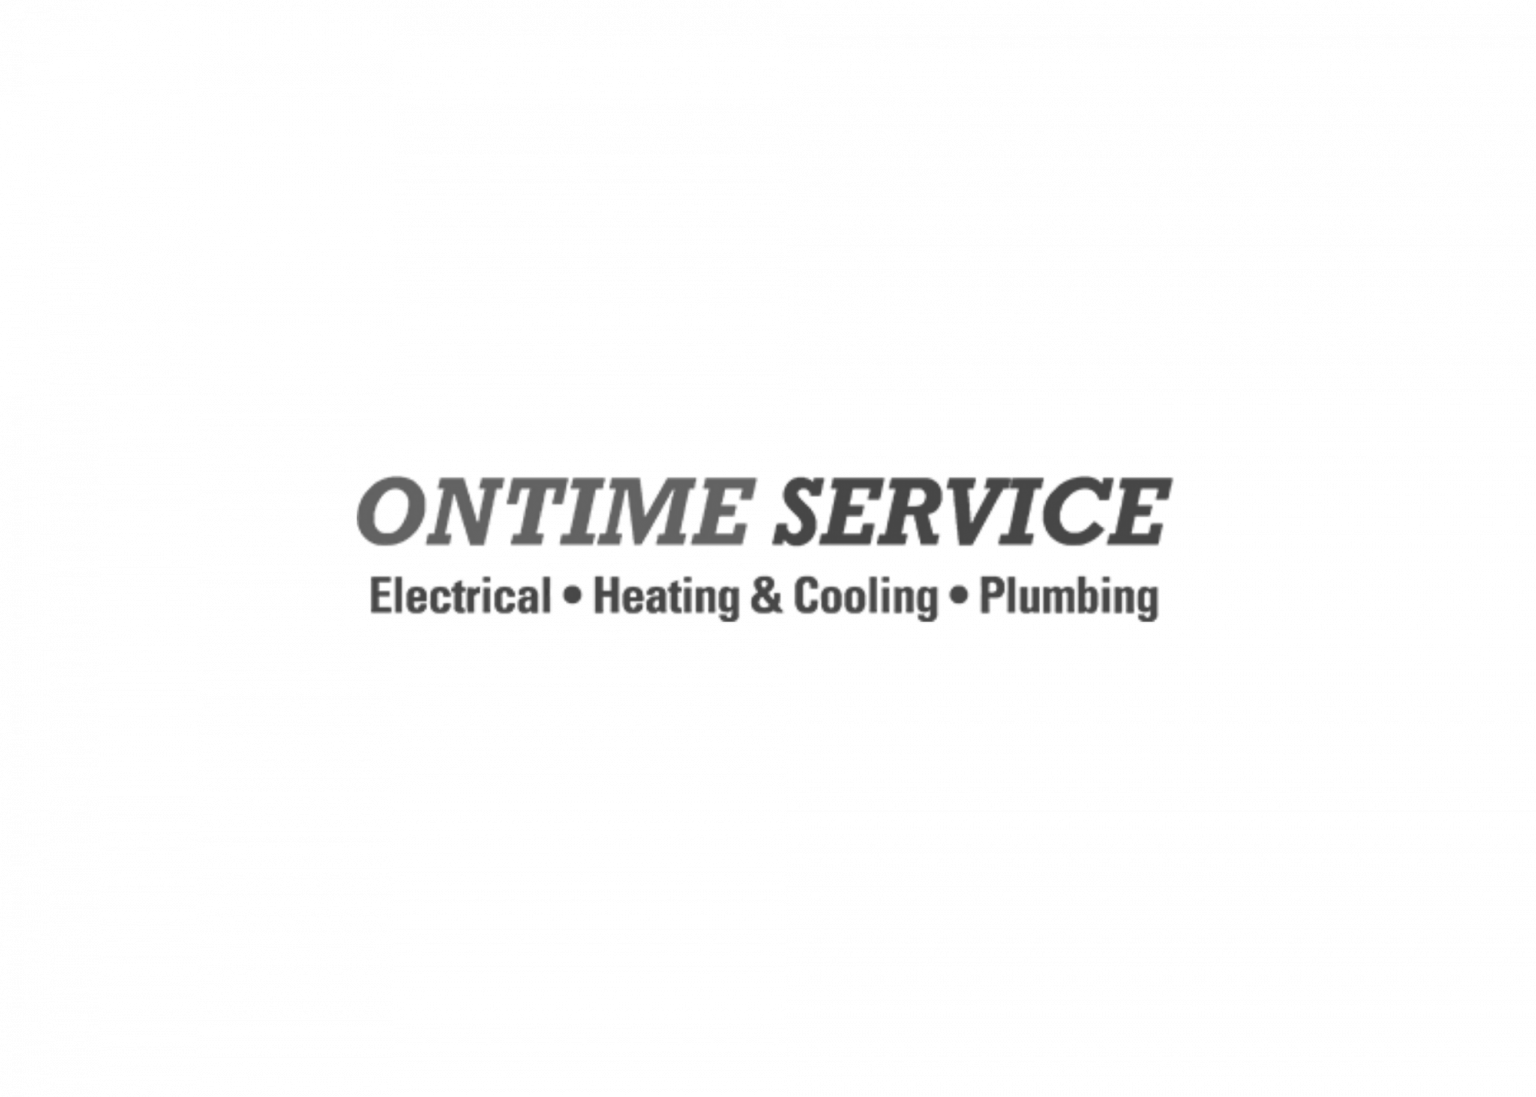 ontime service